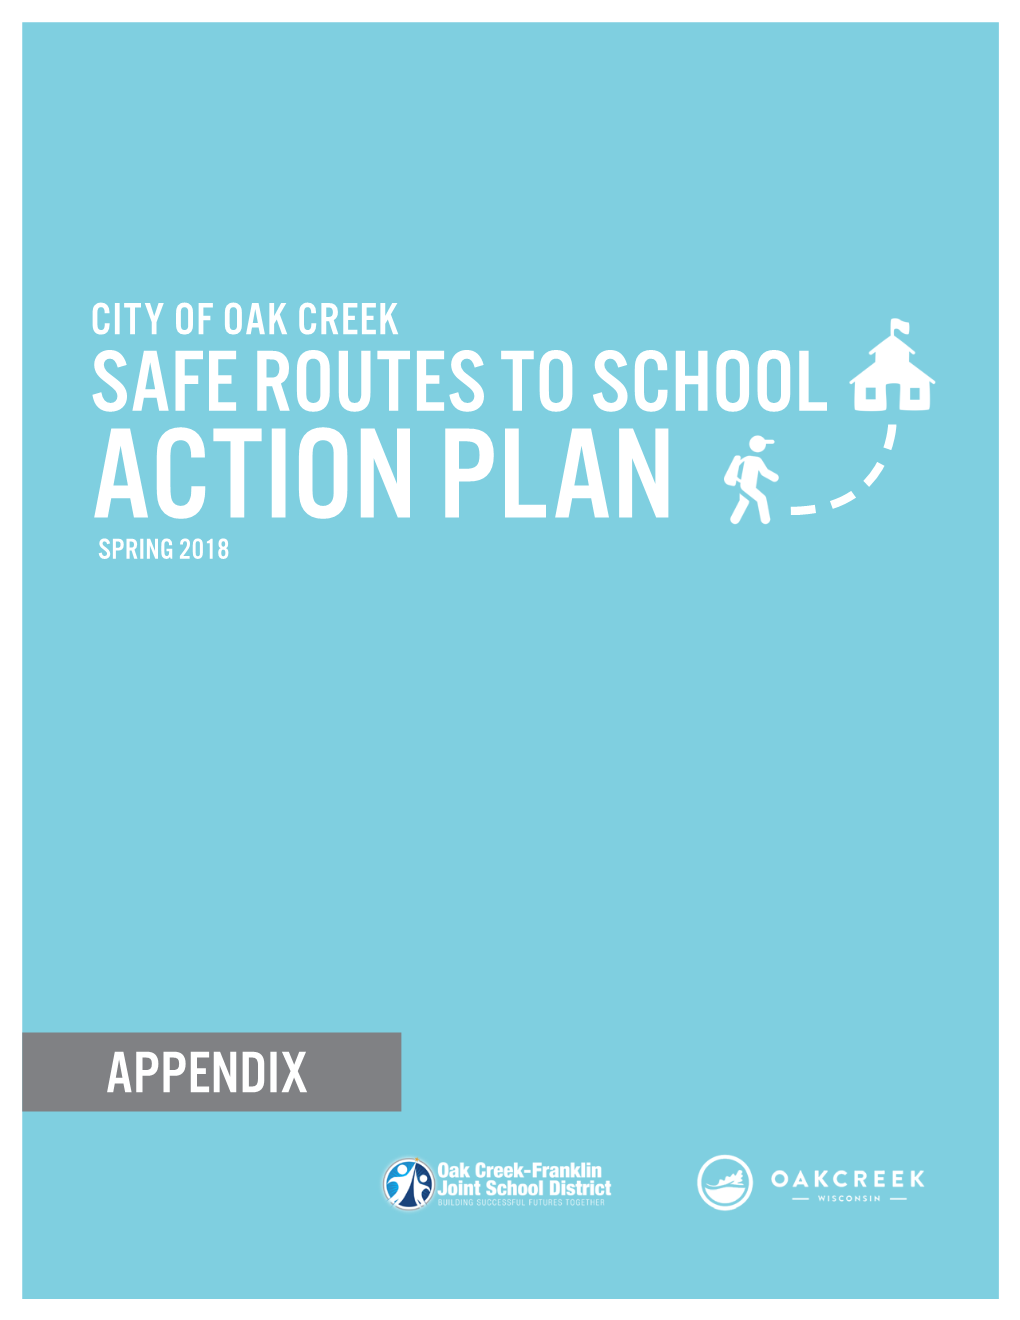 Safe Routes to School Action Plan Spring 2018